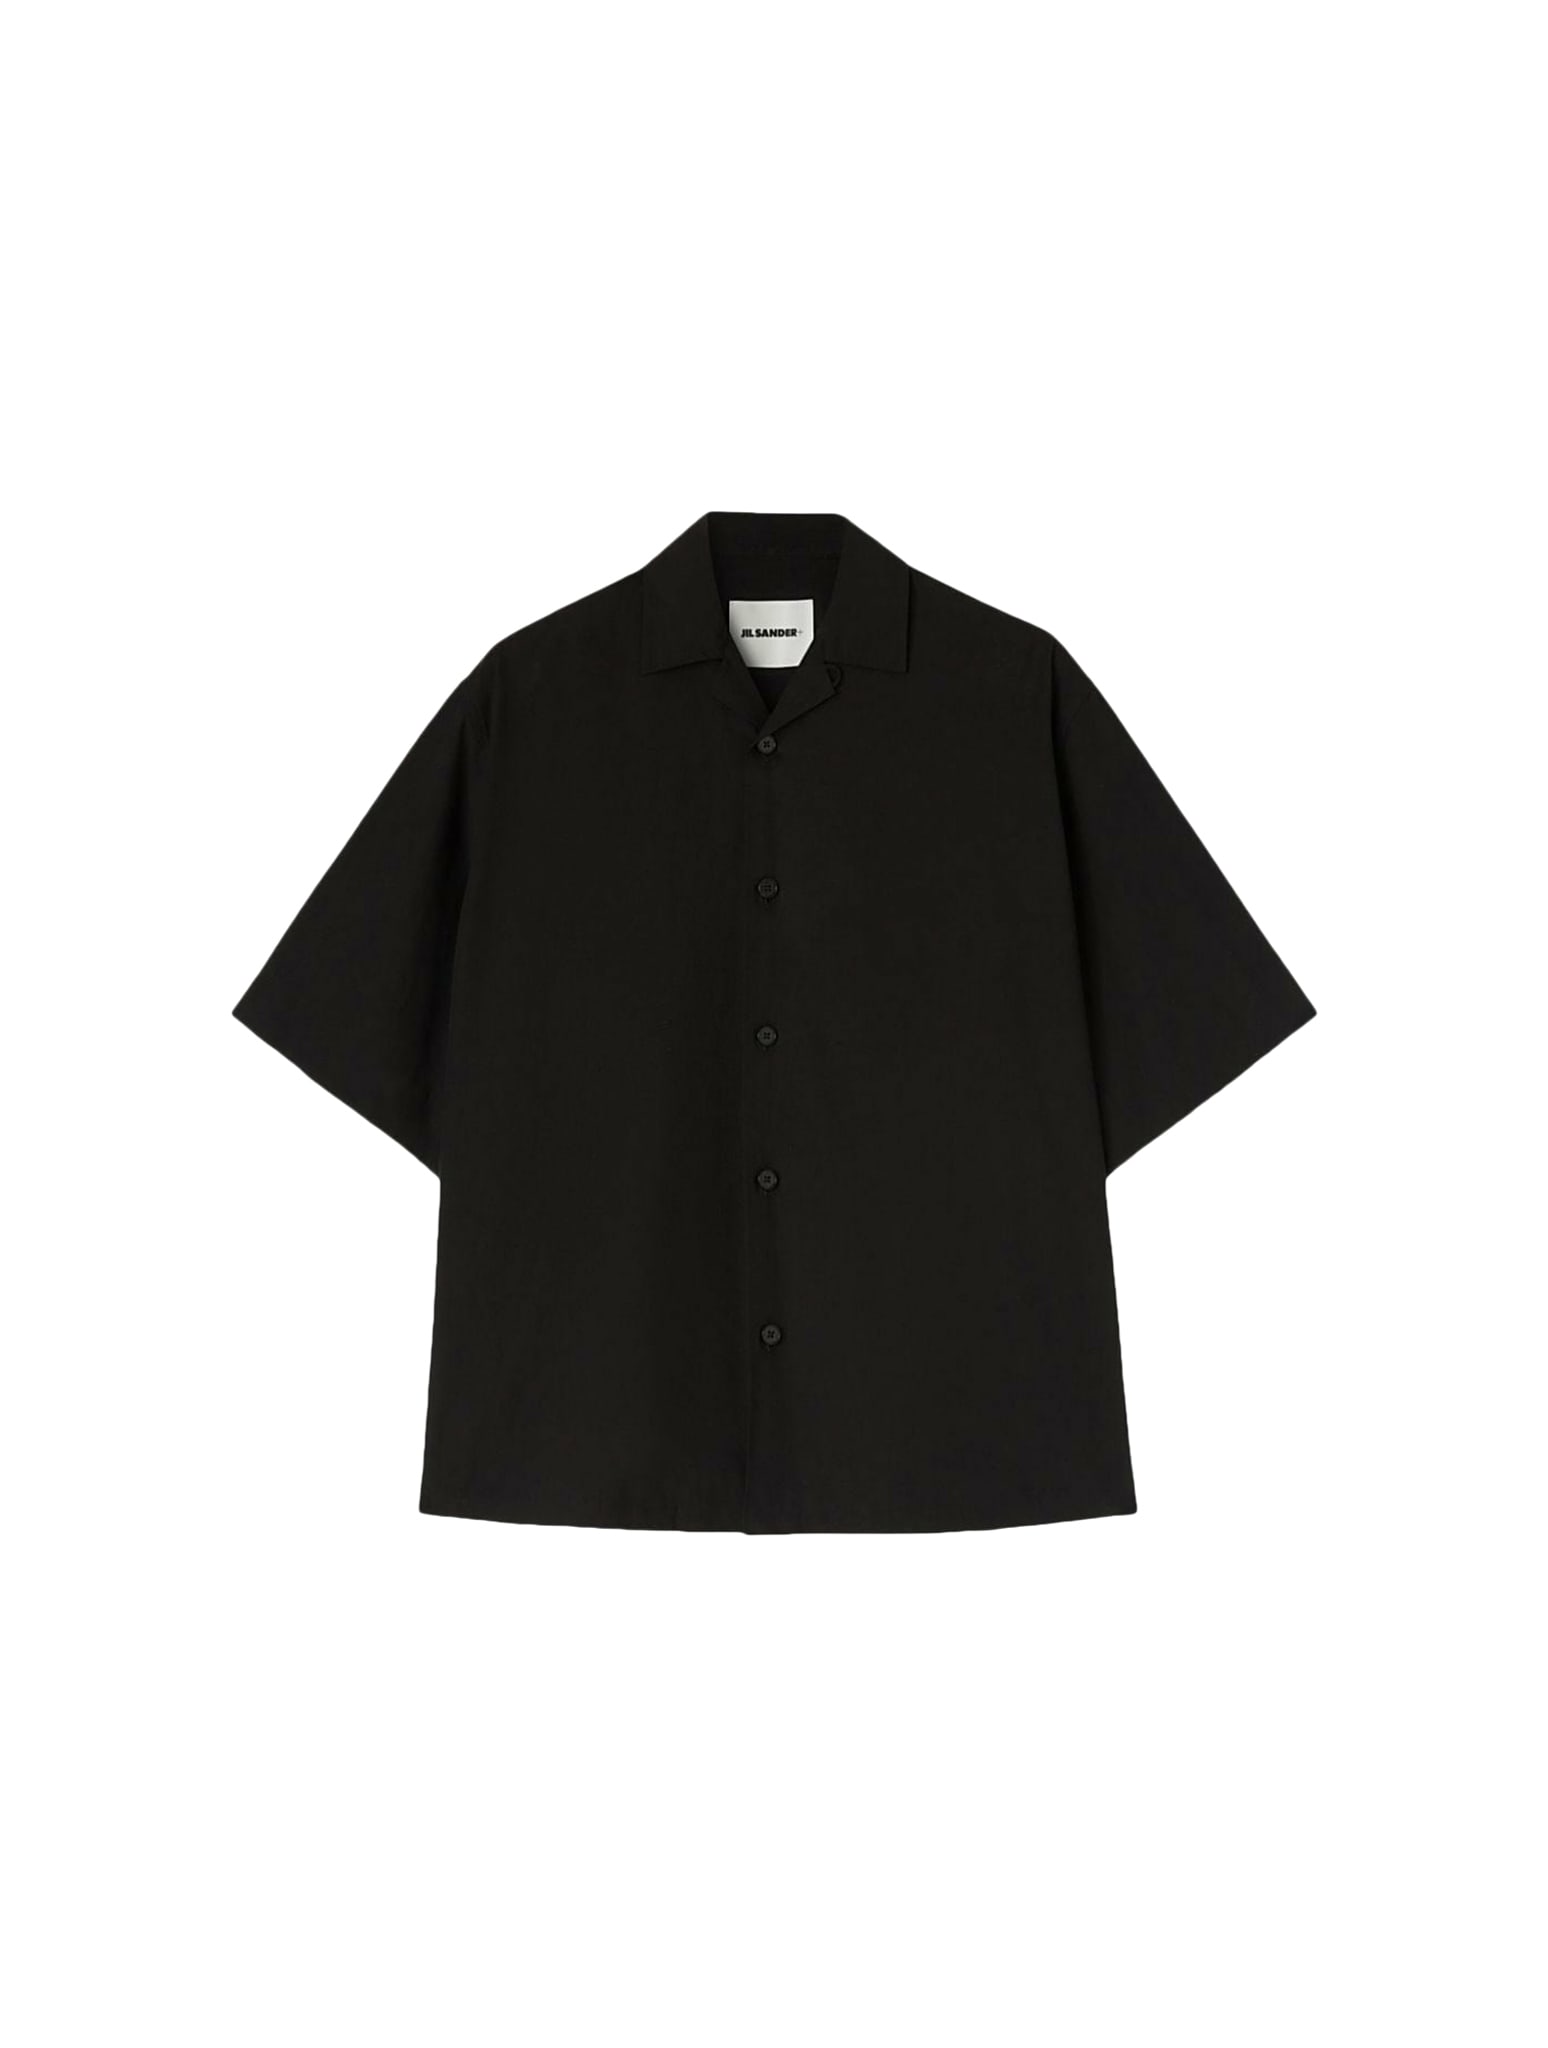 Shop Jil Sander Boxy Fit Short Sleeve Shirt, Open Bowling Shirt Collar, Front Closure With Five Buttons, Classic Yok In Black